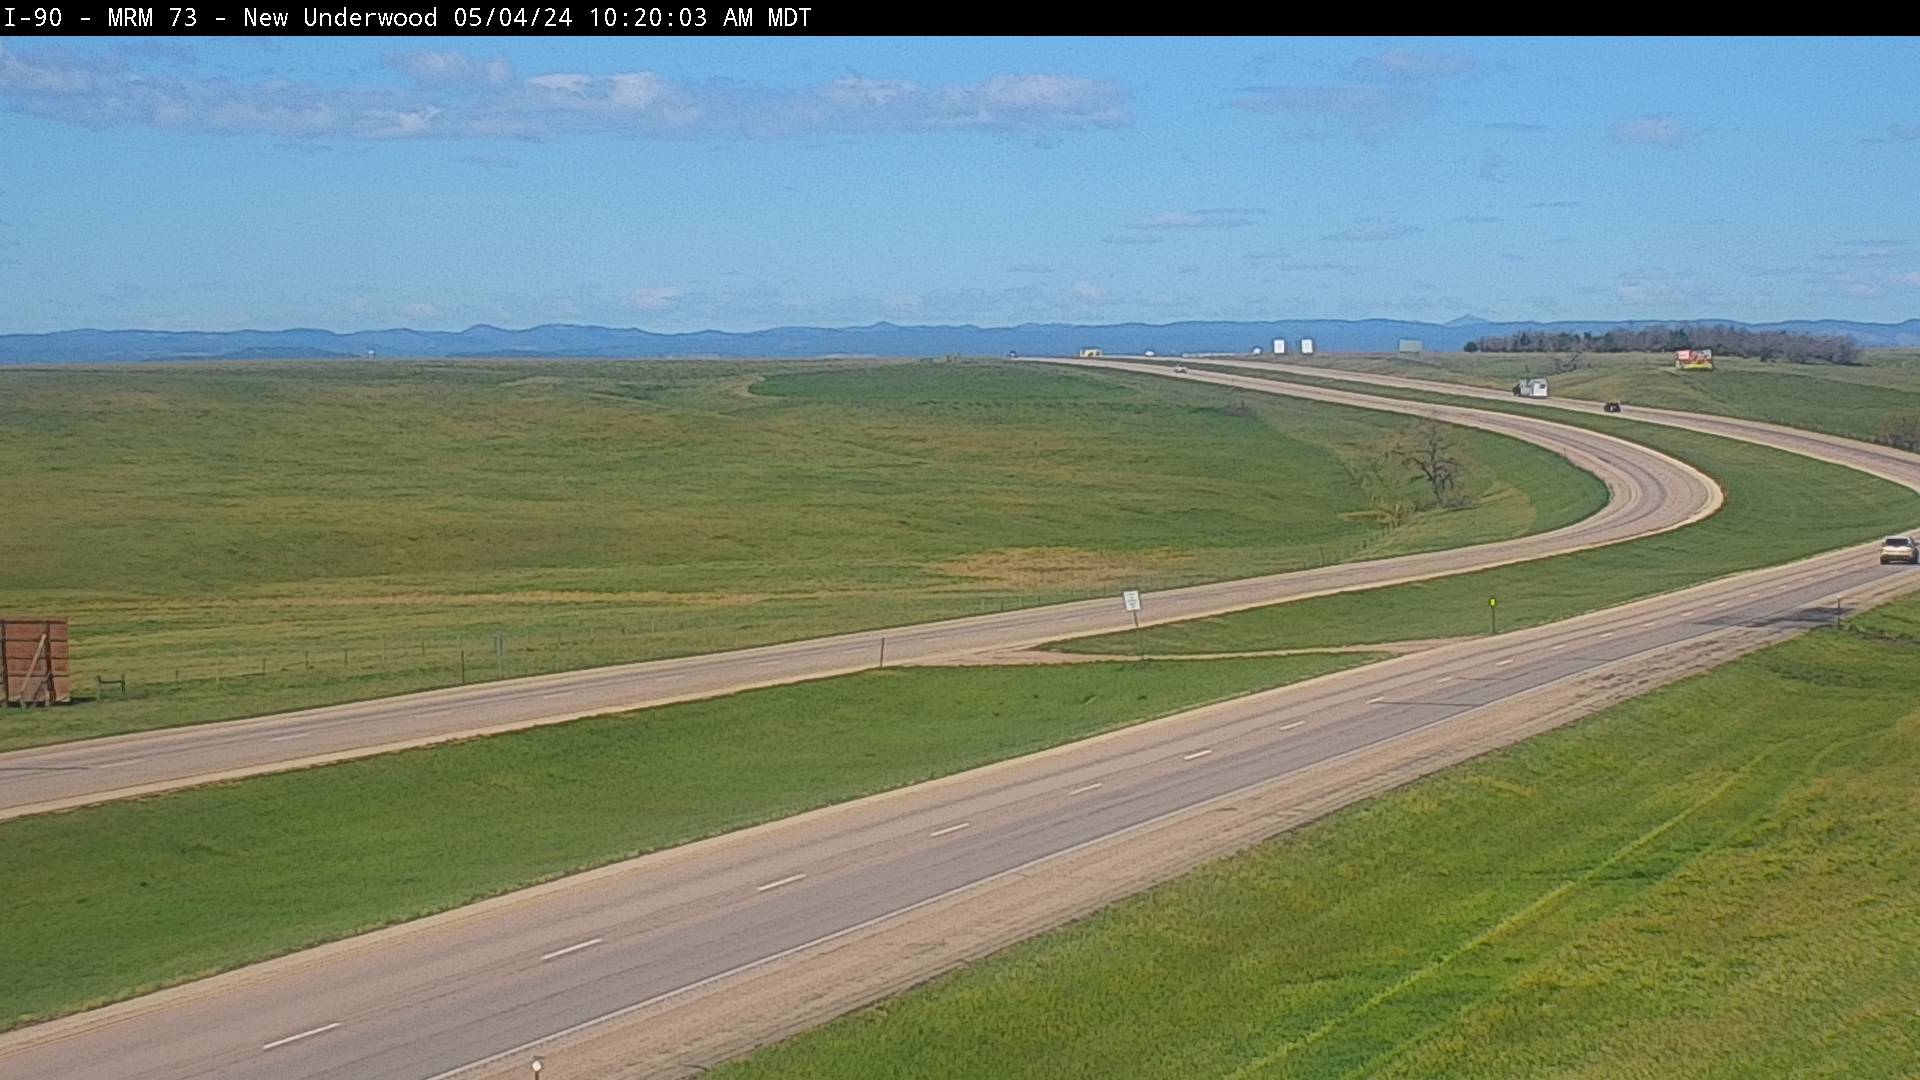 Traffic Cam 5 miles west of town along I-90 @ MP 73 - West Player